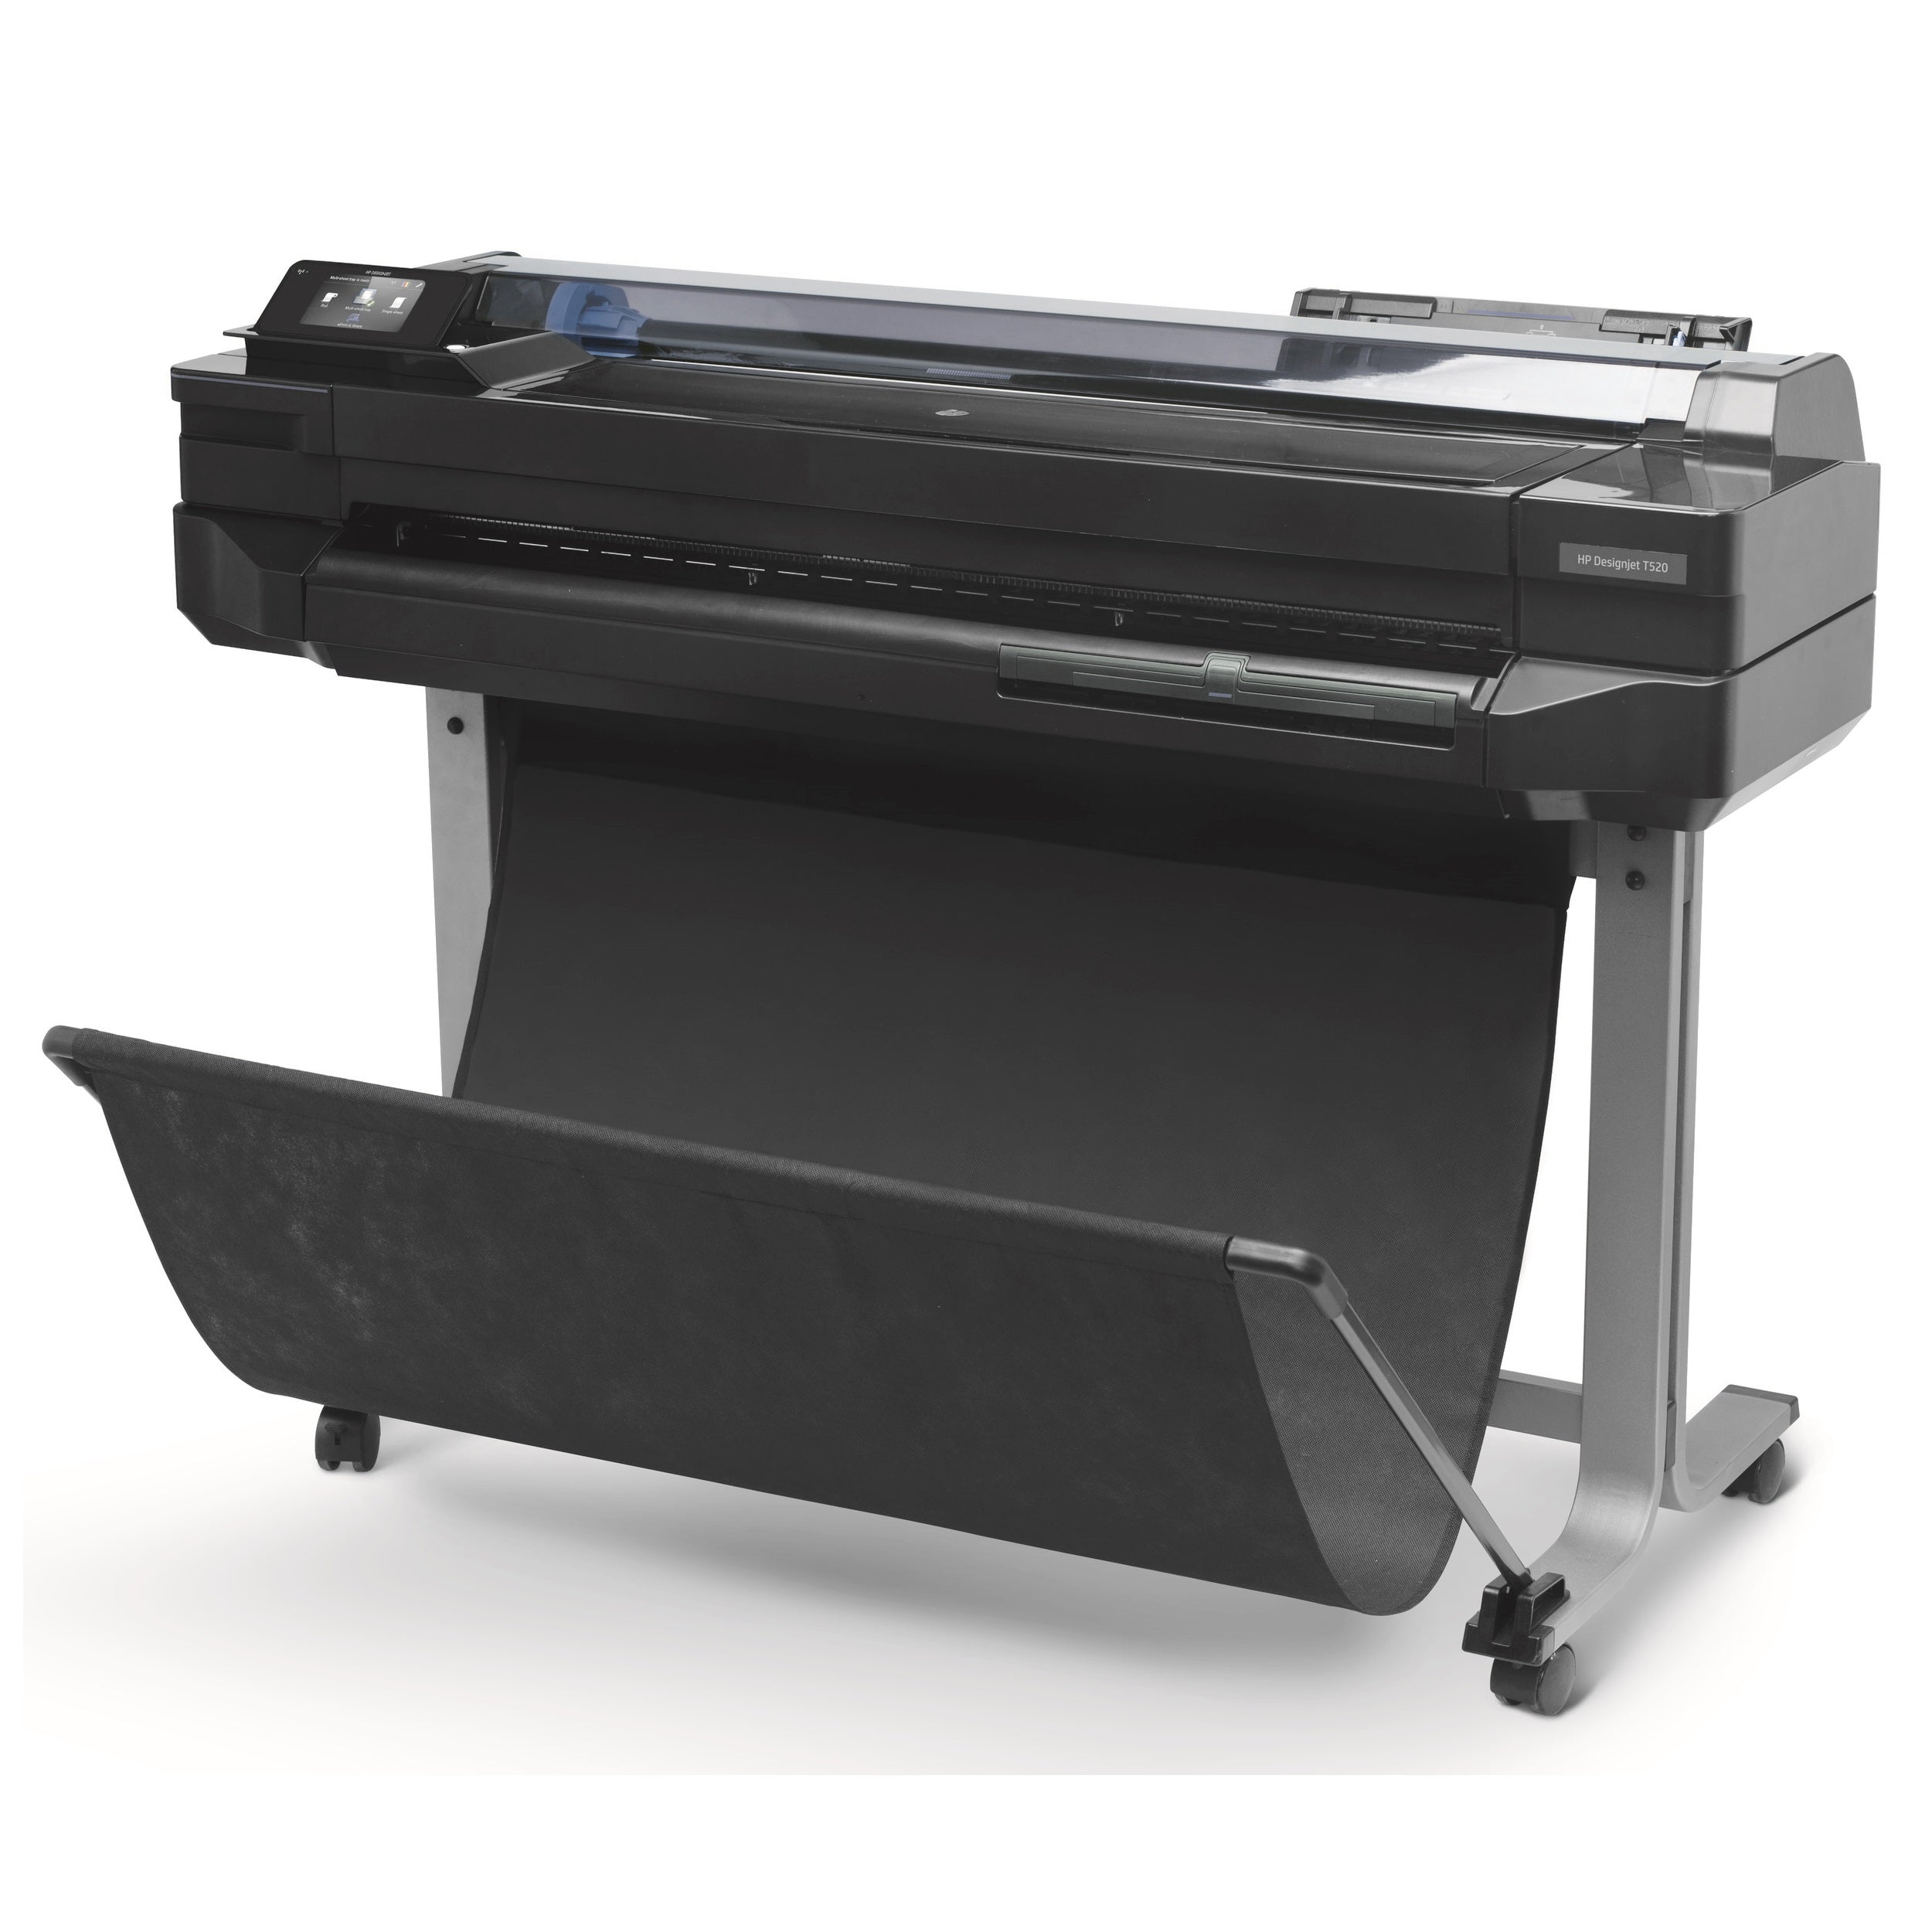 Absolute Toner $39/Month HP DesignJet T520 Large Format Wireless Printer (CQ893C) - 36" inch (914-mm), With Mobile Printing Large Format Printer